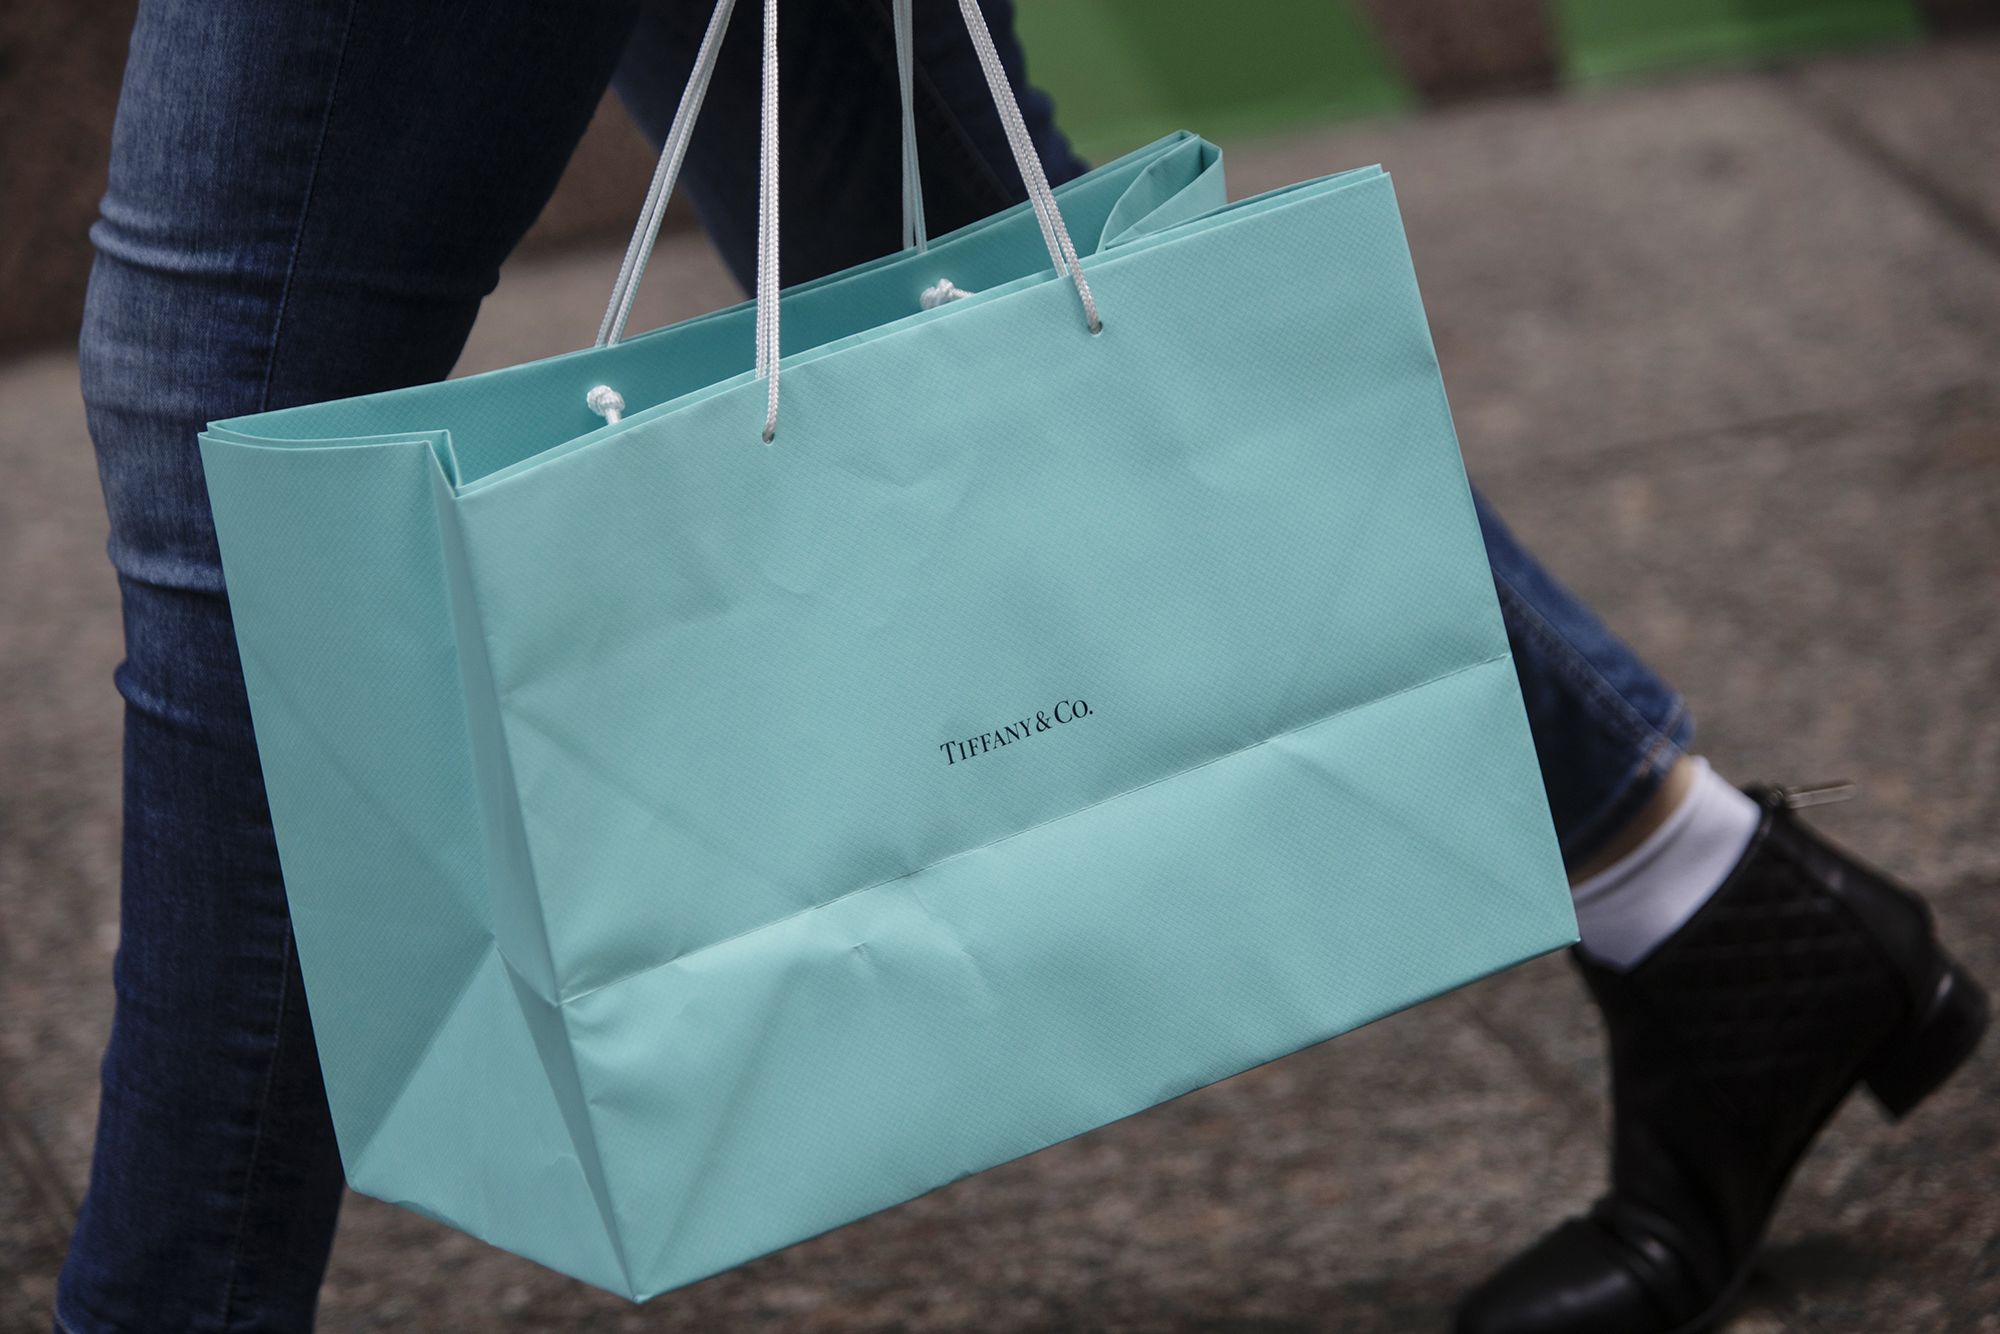 Tiffany & Co stock price plunges 10% as the Louis Vuitton parent company  LVMH pulls out of the deal